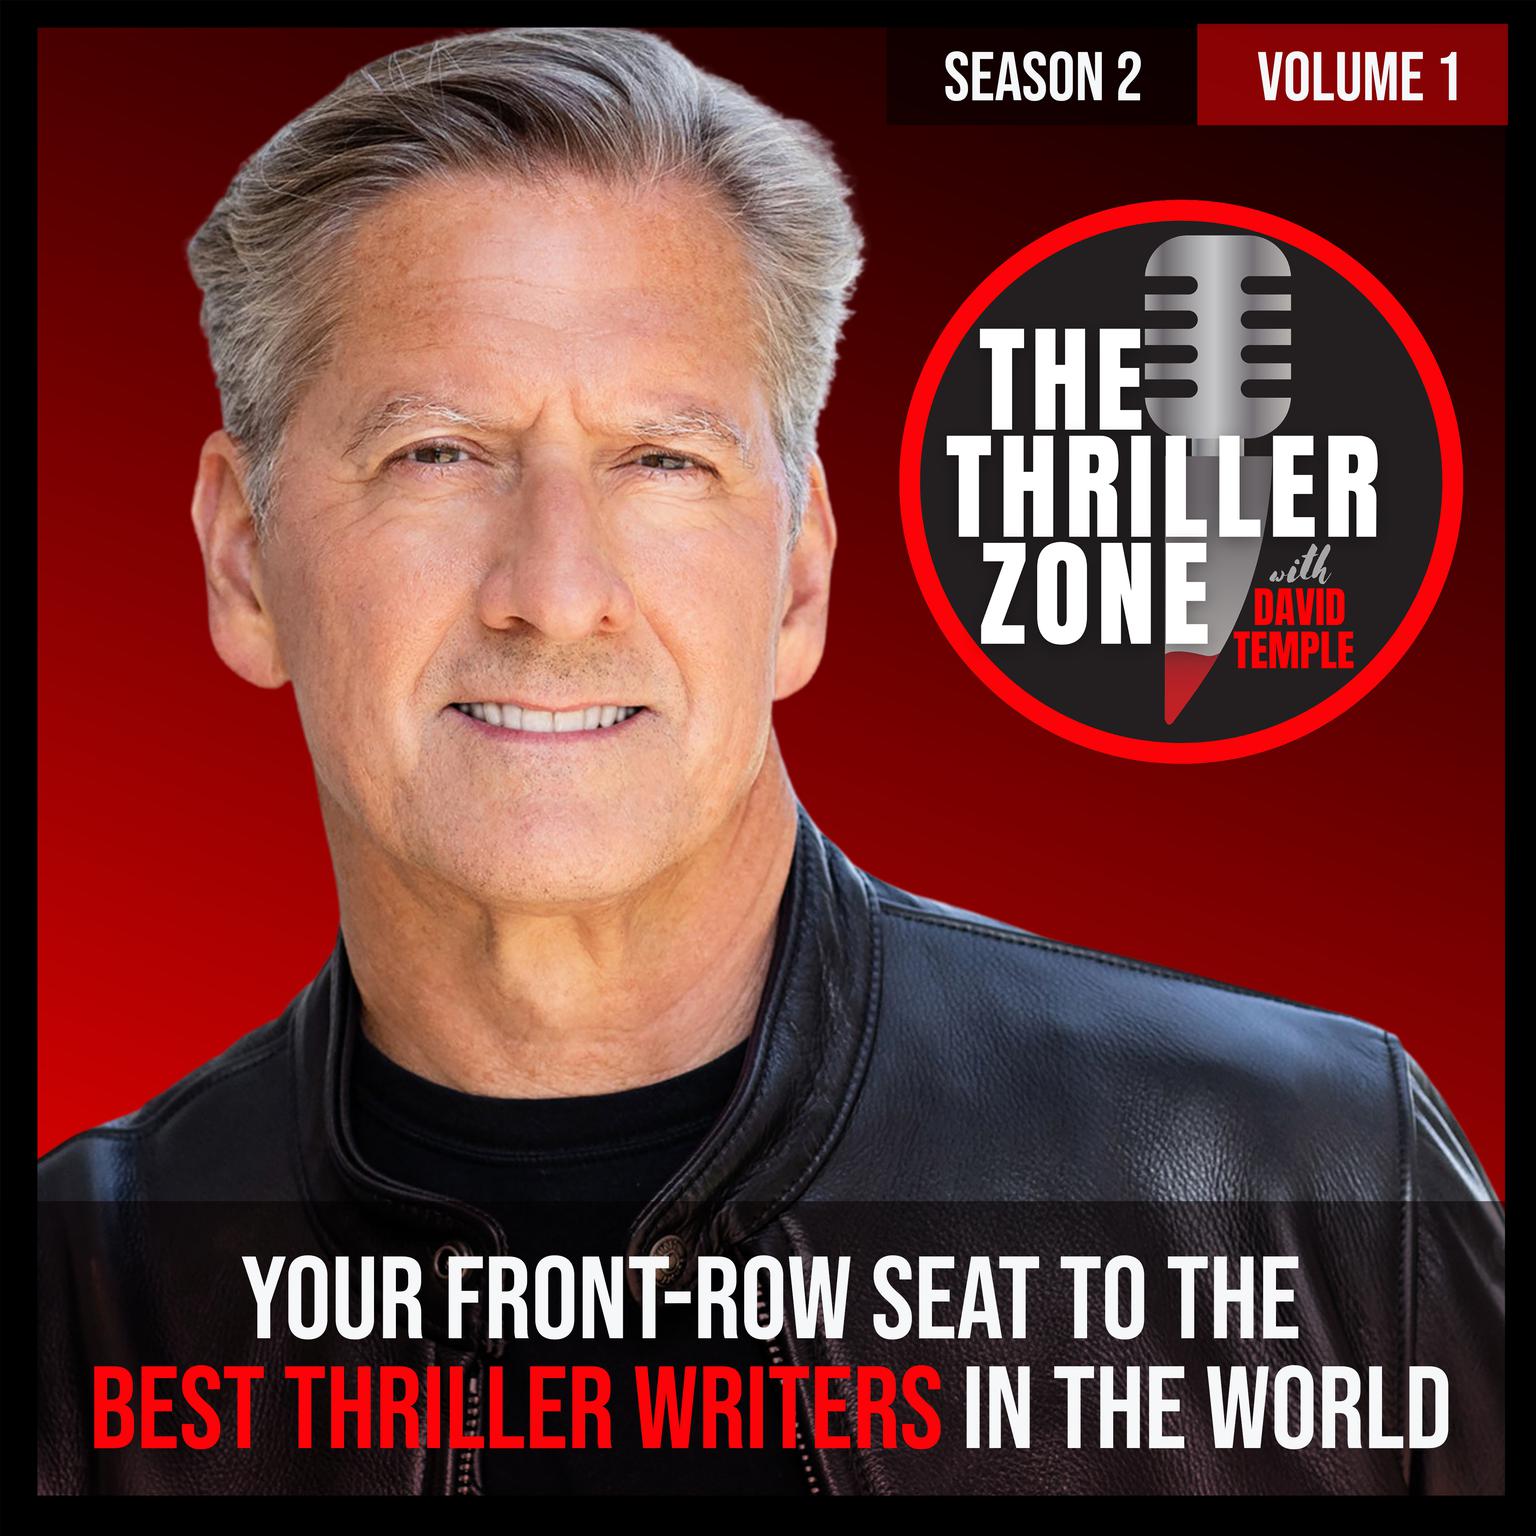 The Thriller Zone Podcast (TheThrillerZone.com): Season 2, Vol. 1: Your Front-Row Seat to the Best Thriller Writers in the World  Audiobook, by David Temple